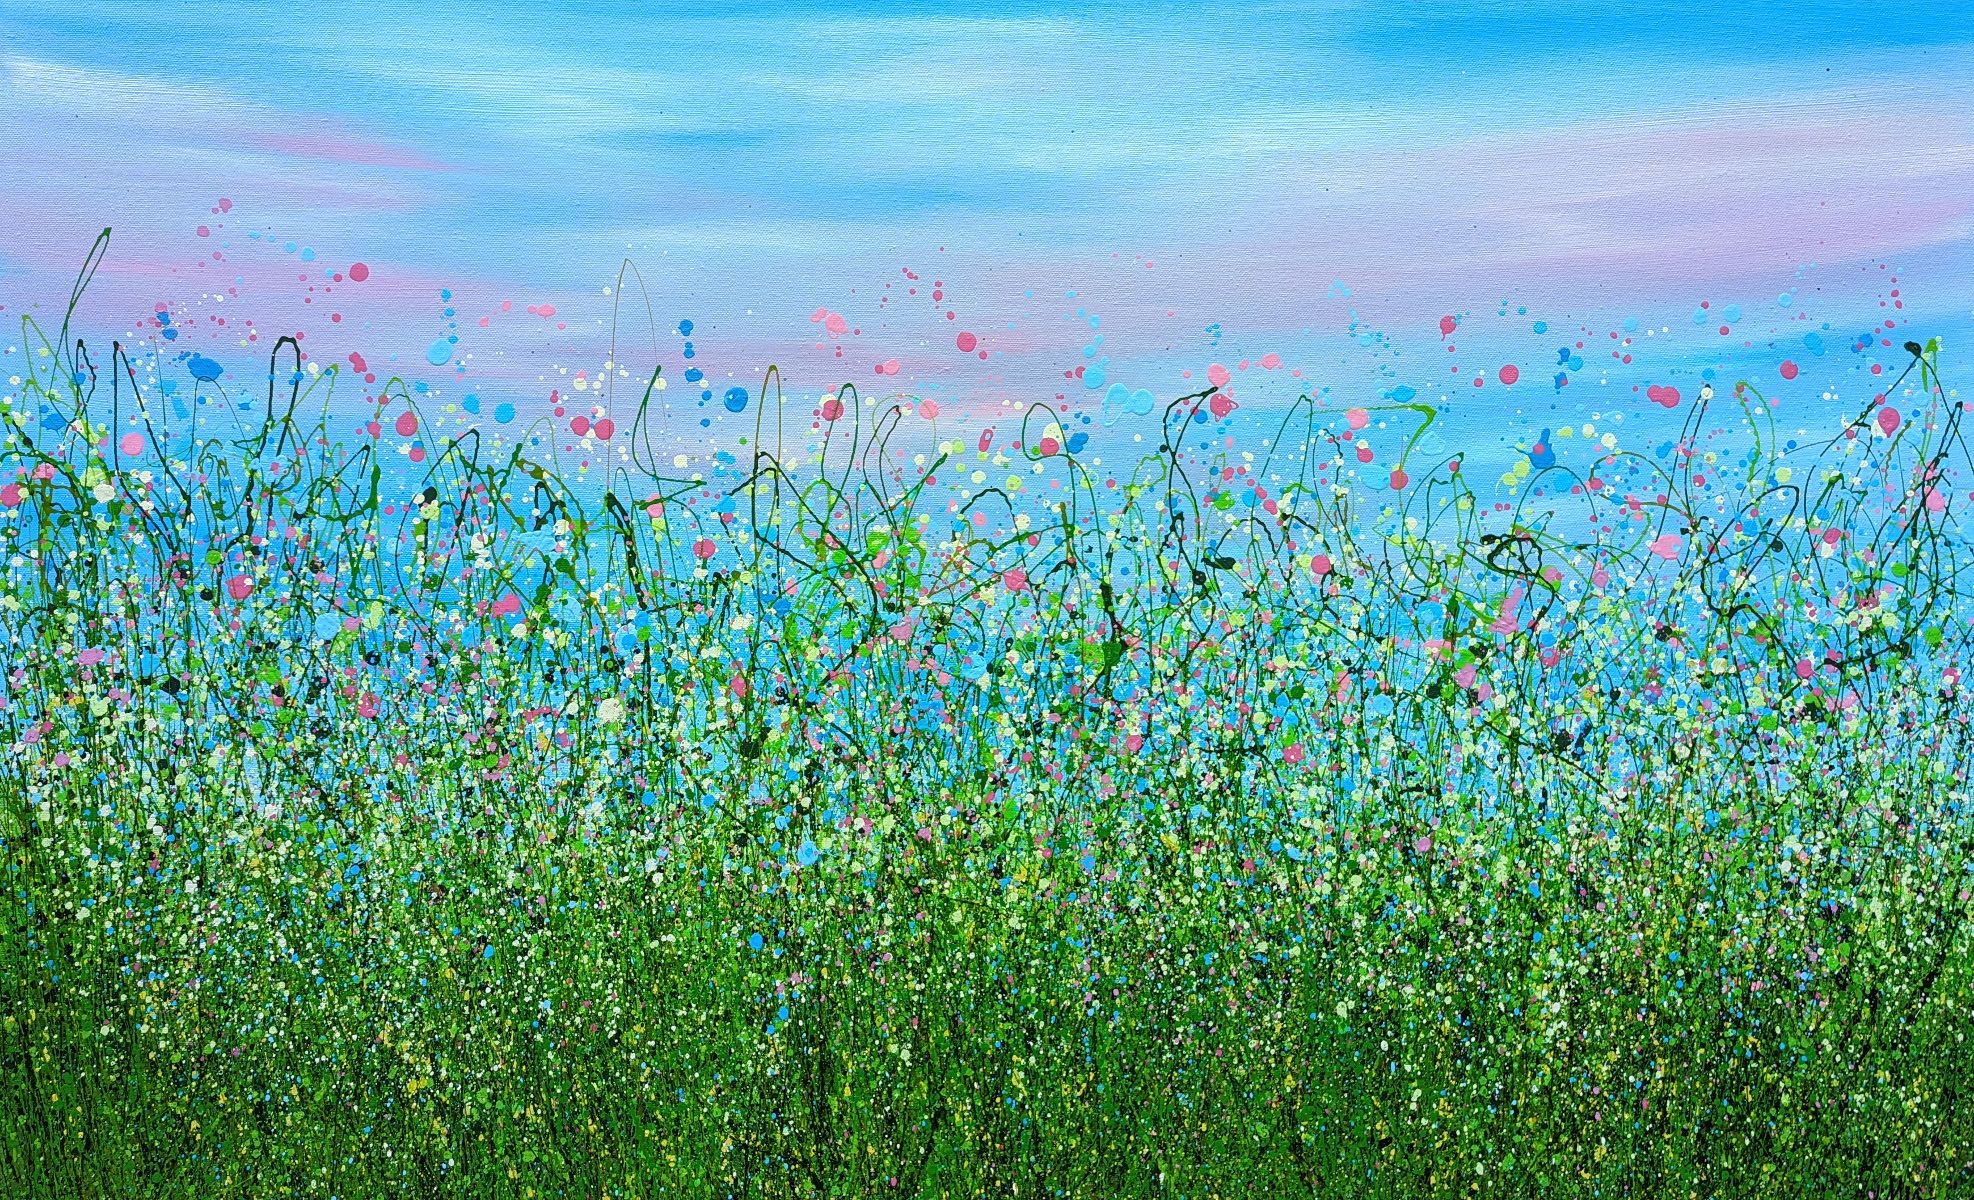 Wild & Free - Enchanted Meadows #4 by Lucy Moore